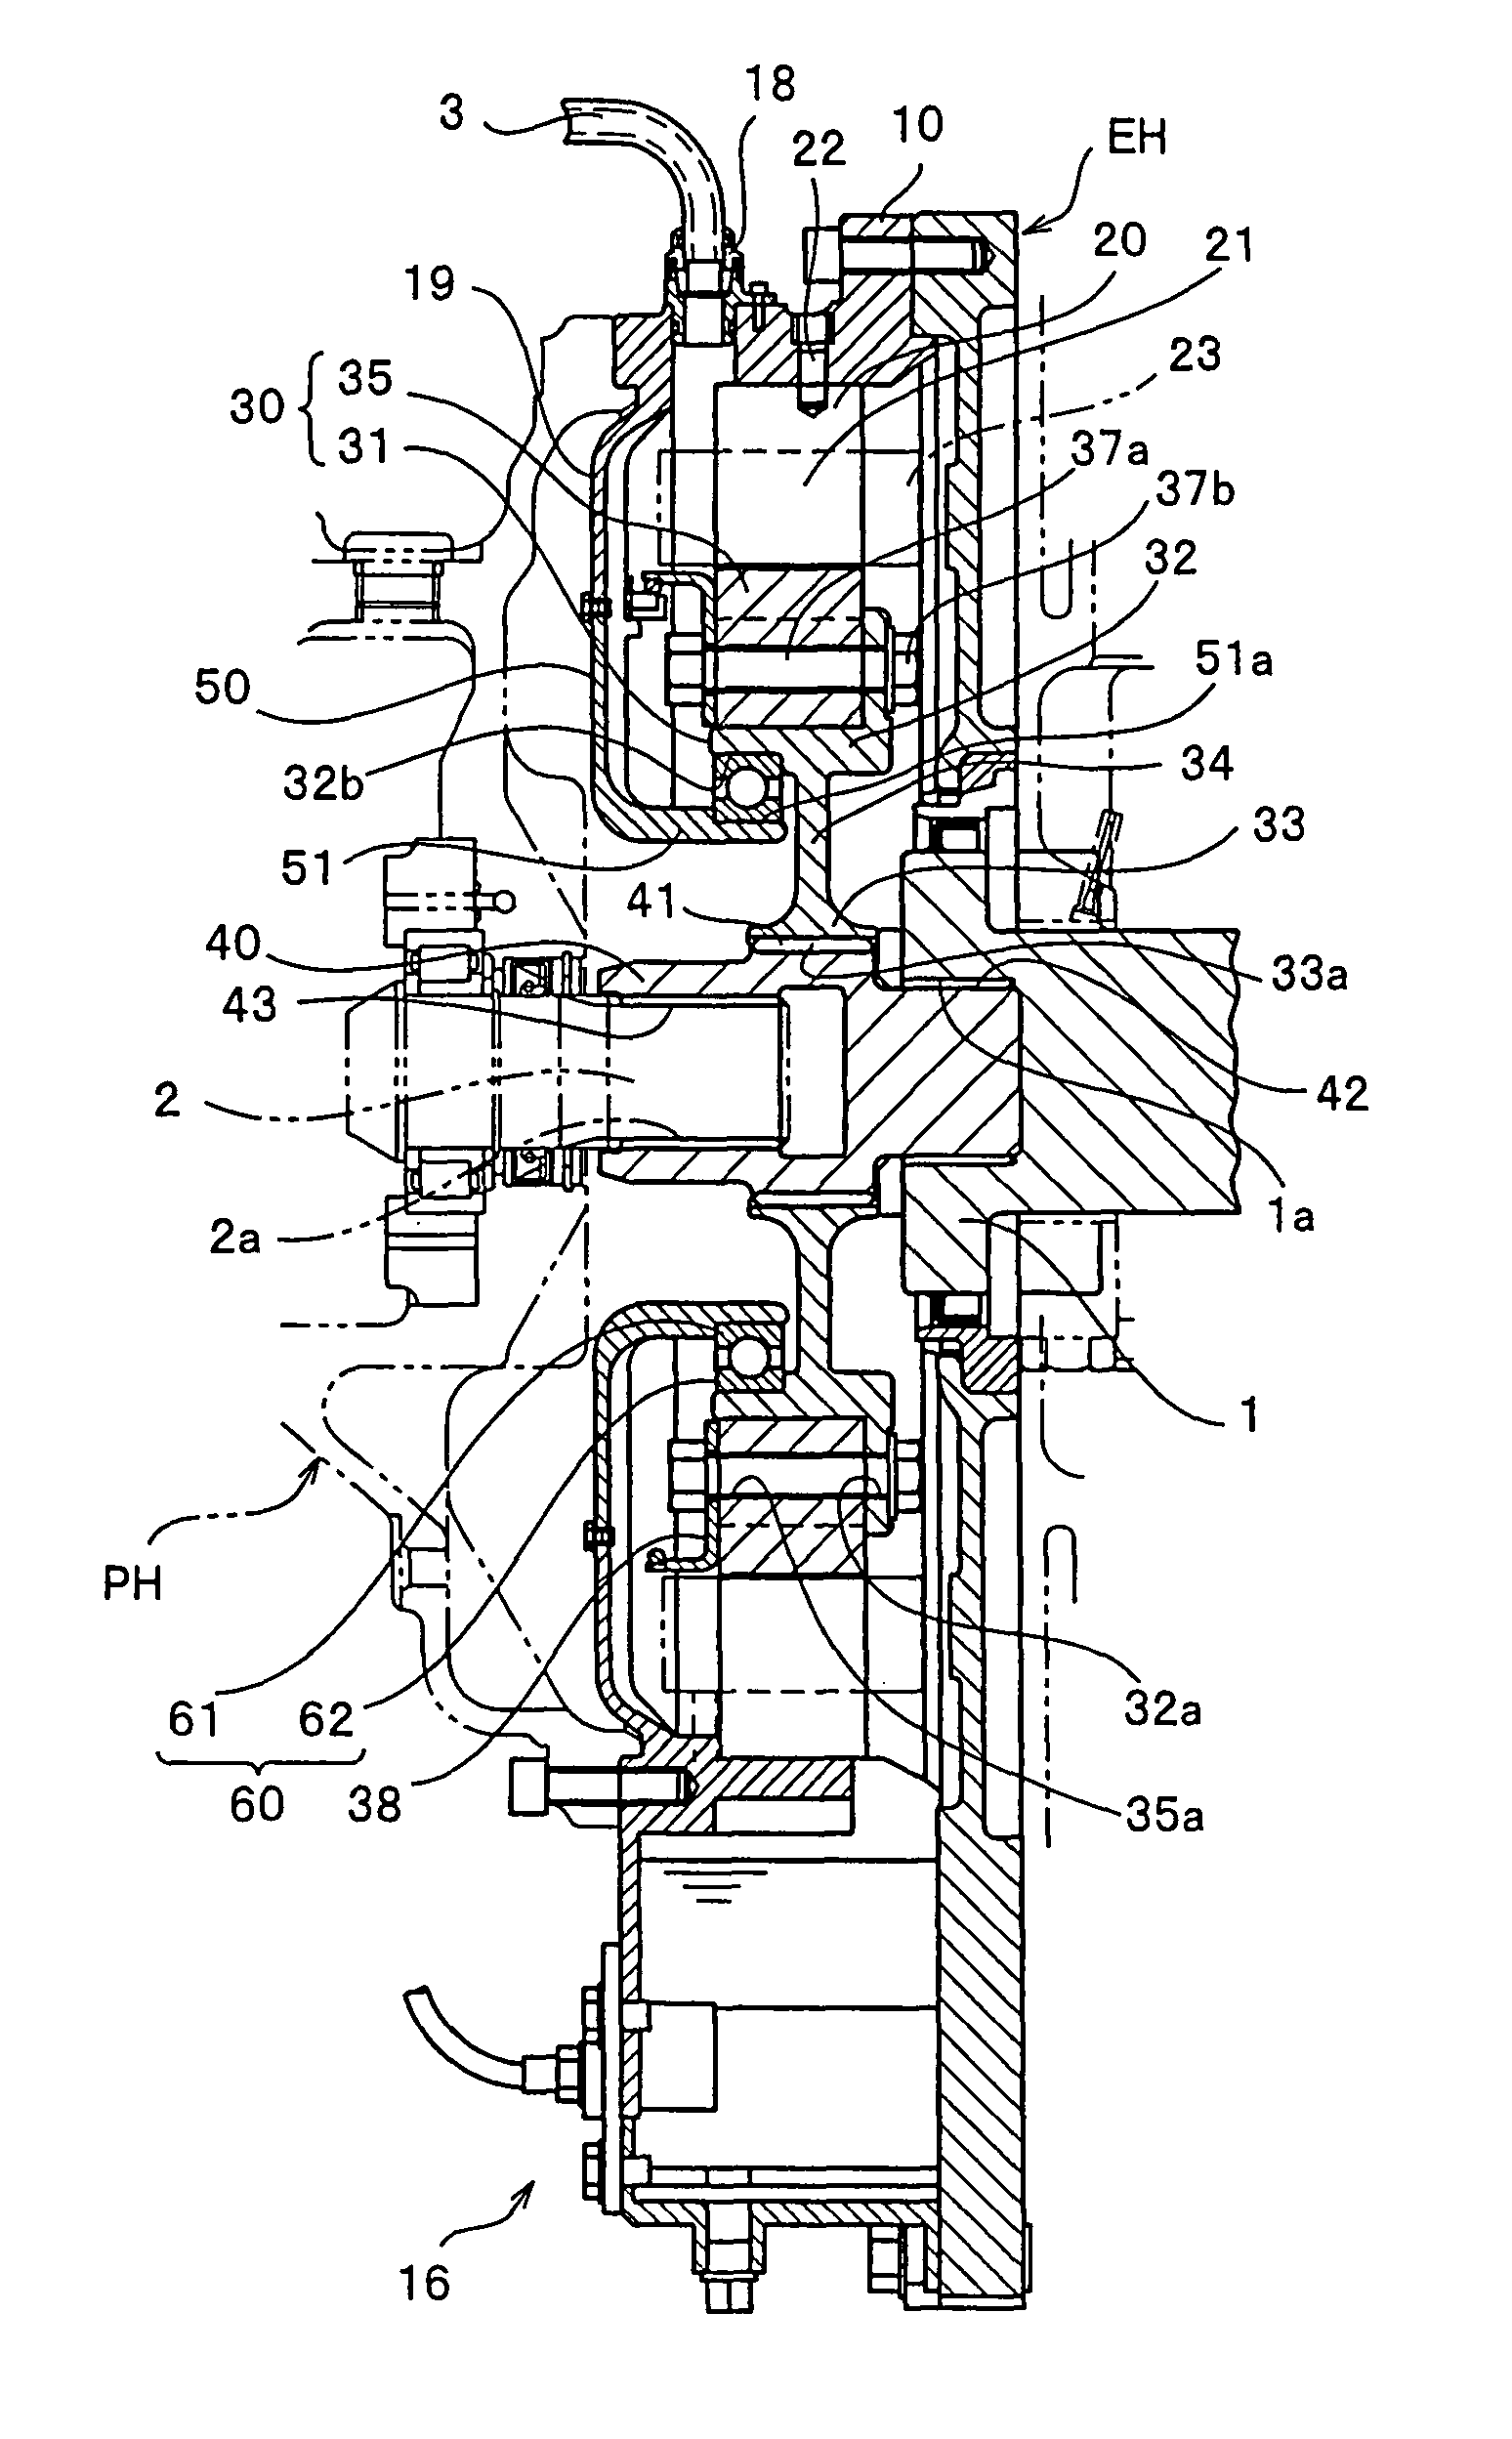 Generator/motor mounted as an auxiliary power unit of an engine